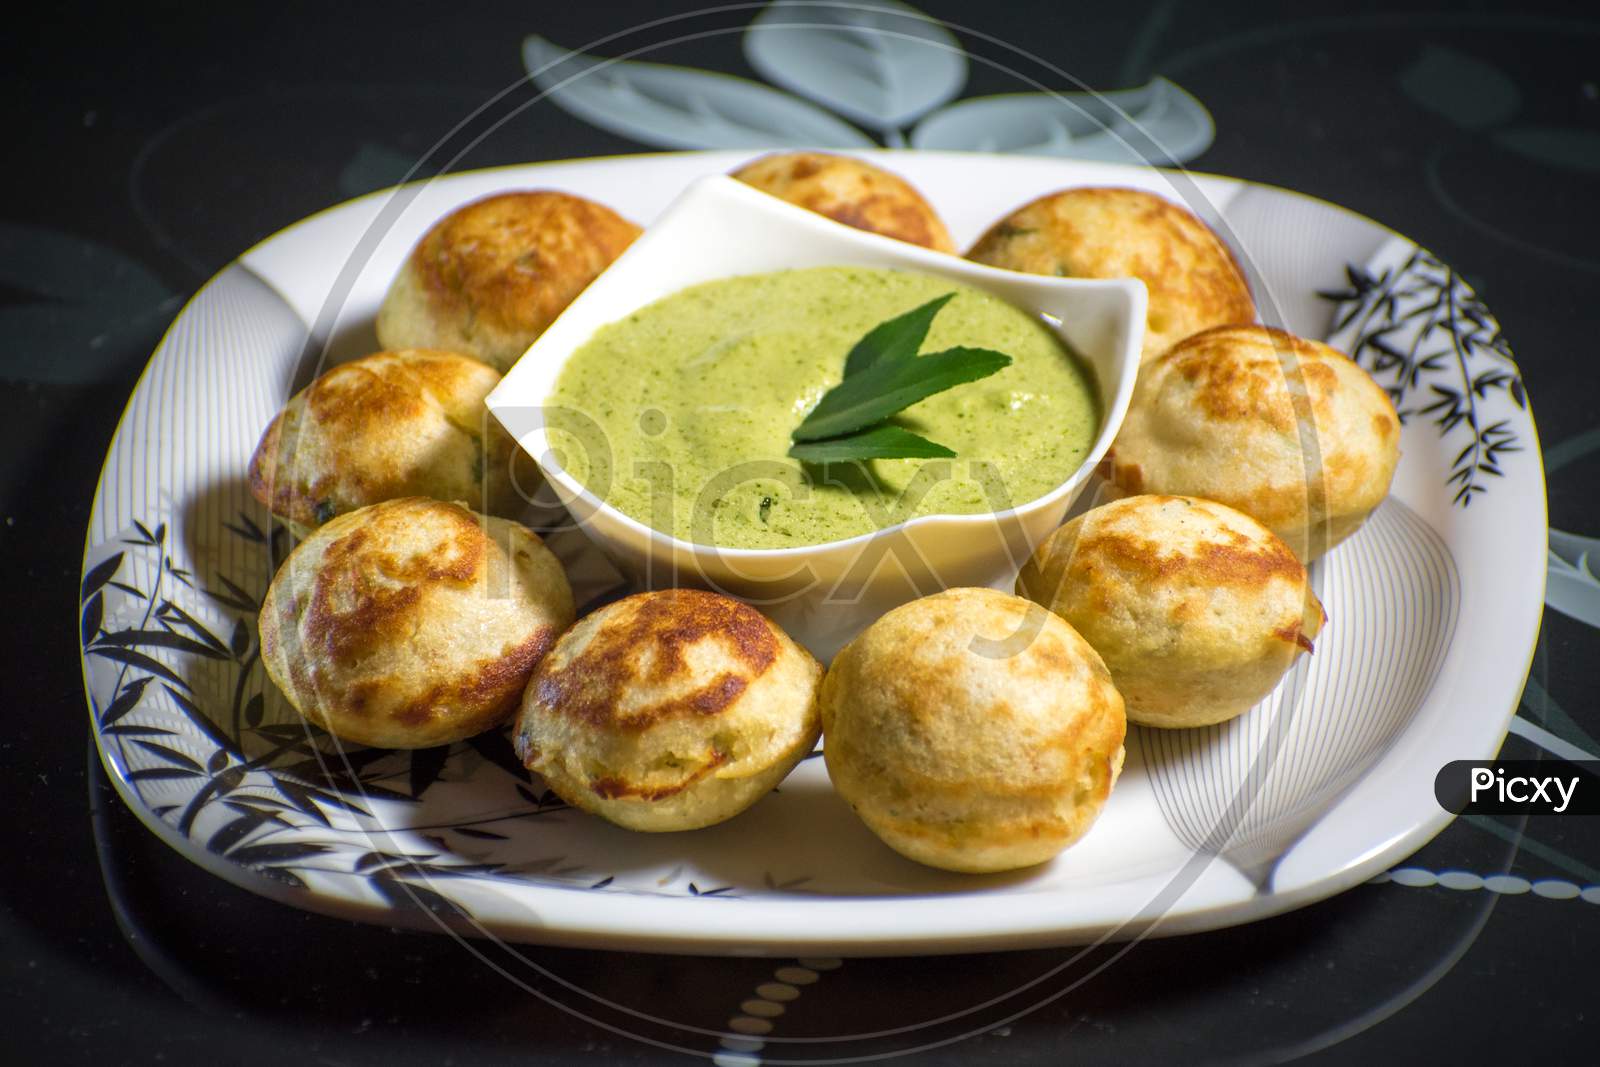 Indian Home Made Recipe 'Appe' with Green Chatni. Specialty Of South Indian Food